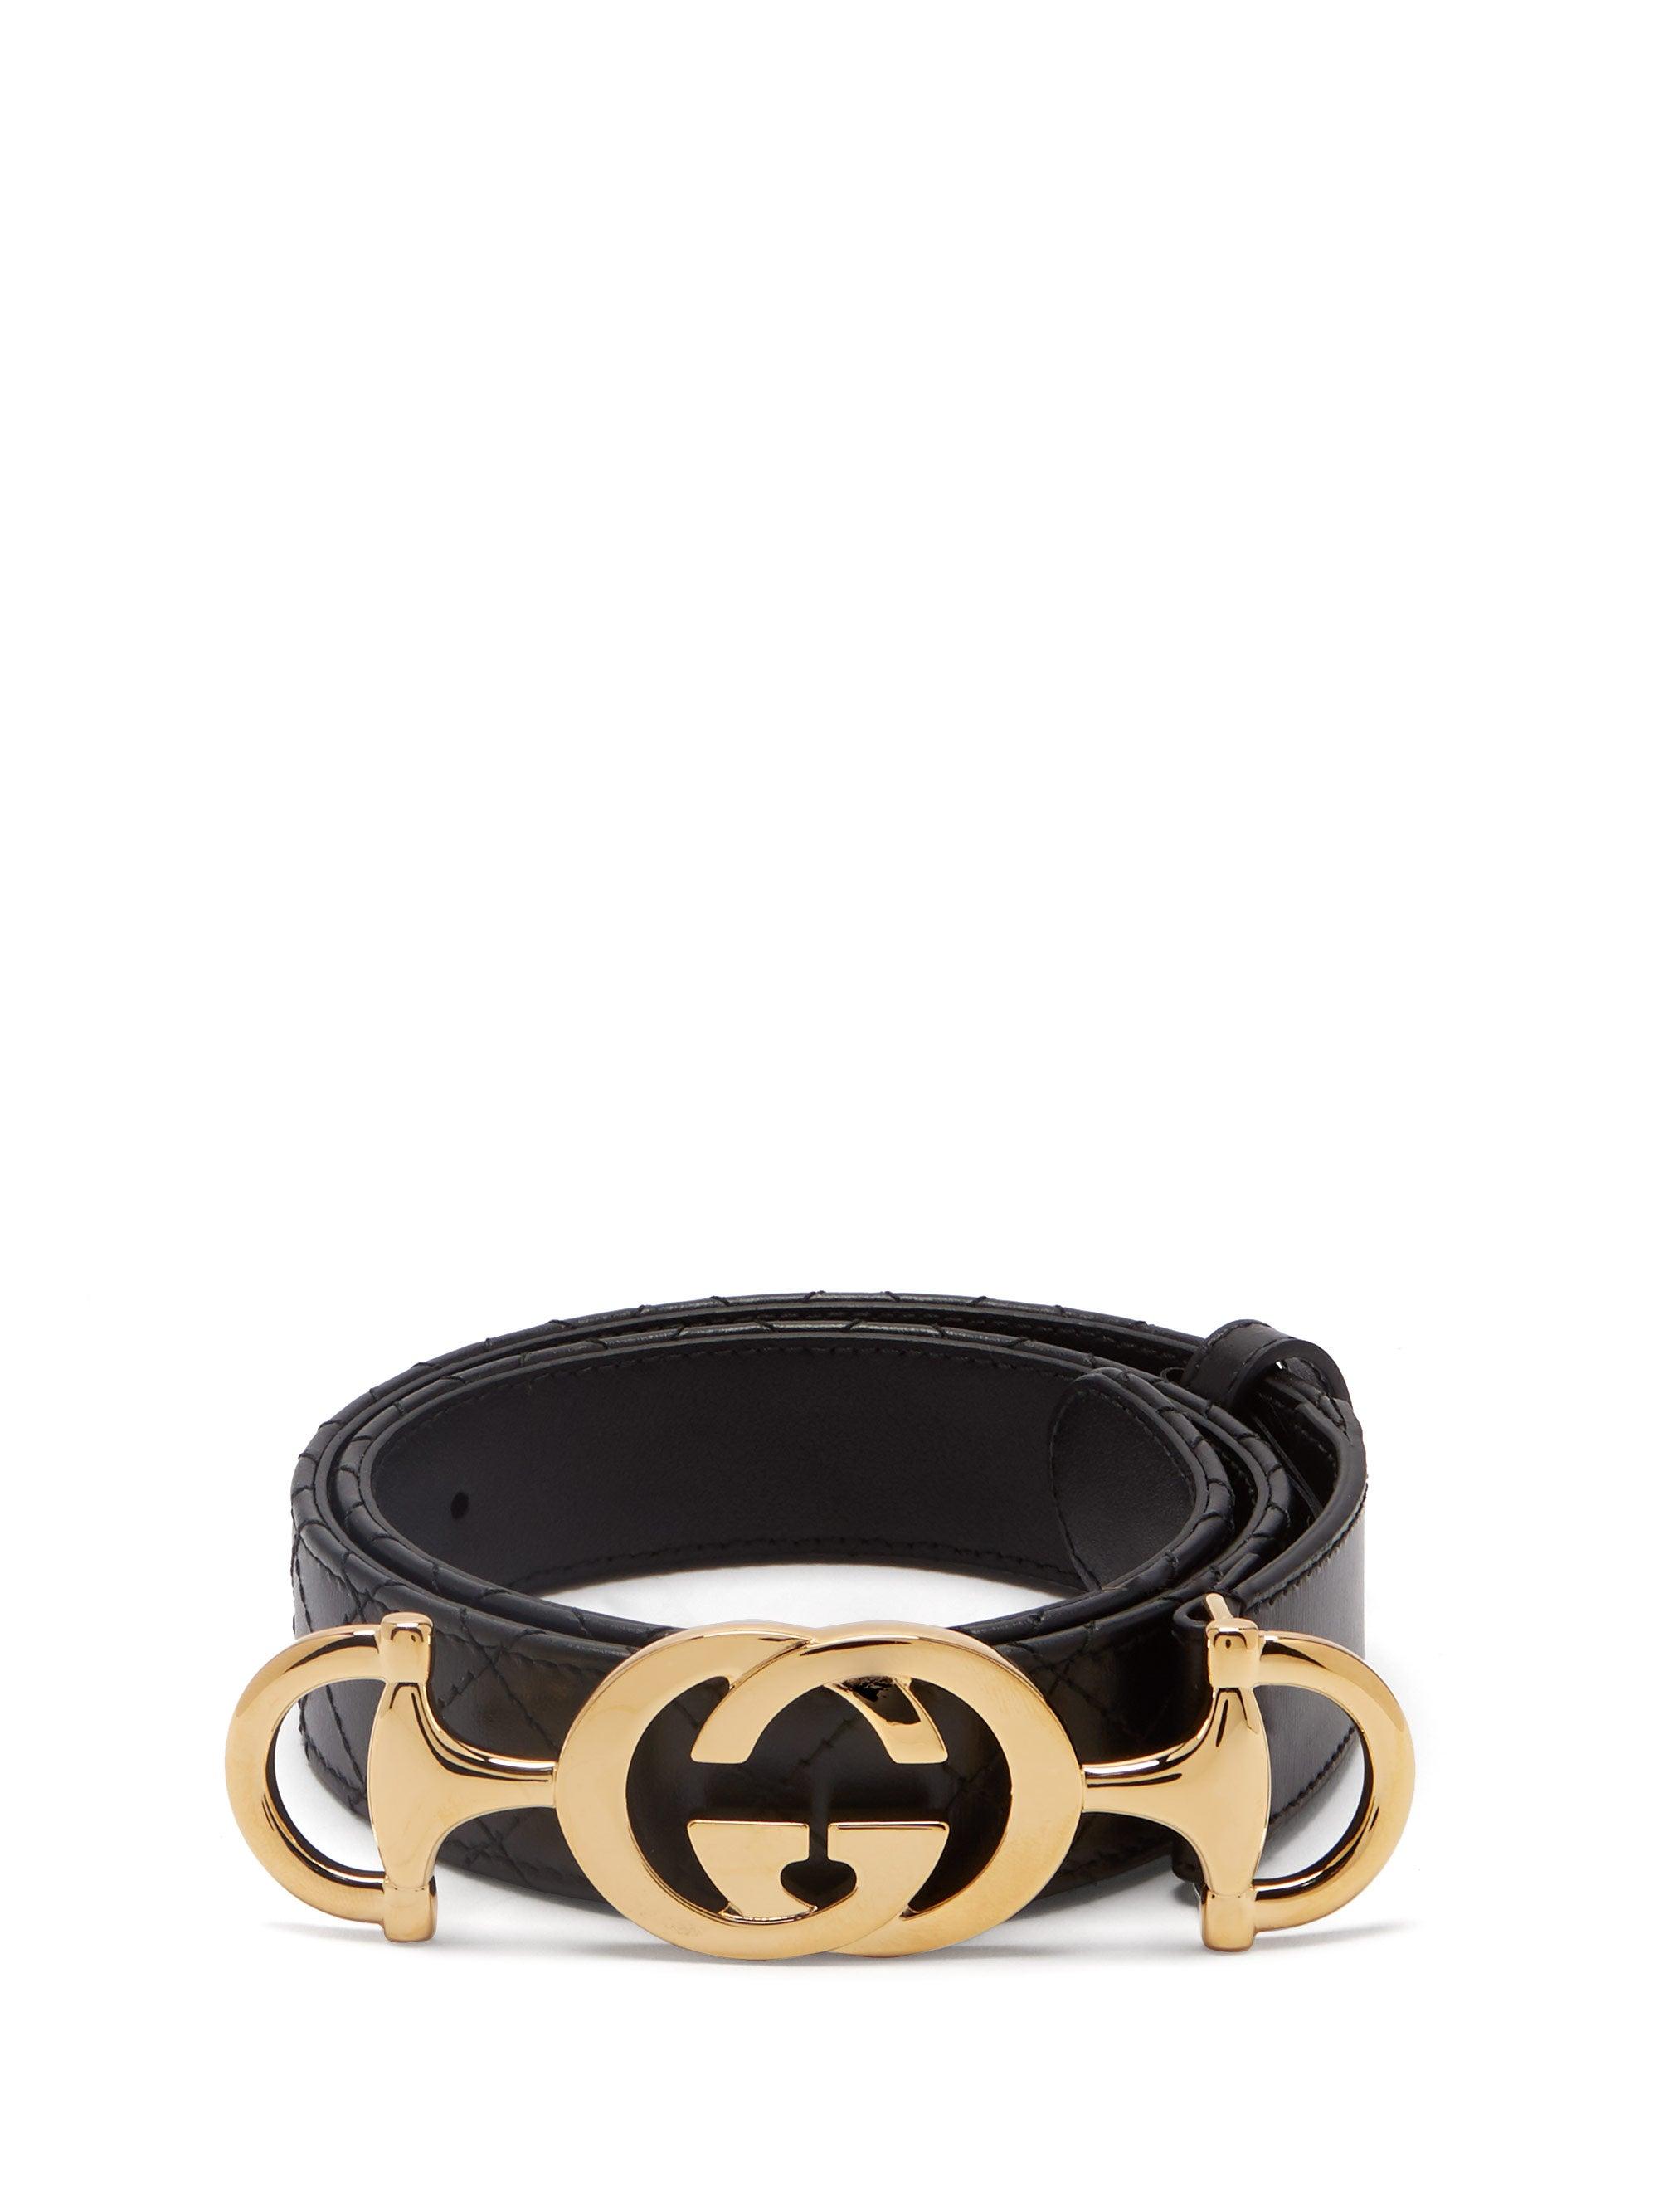 Gucci Horsebit-buckle Quilted Leather Belt in Black - Lyst